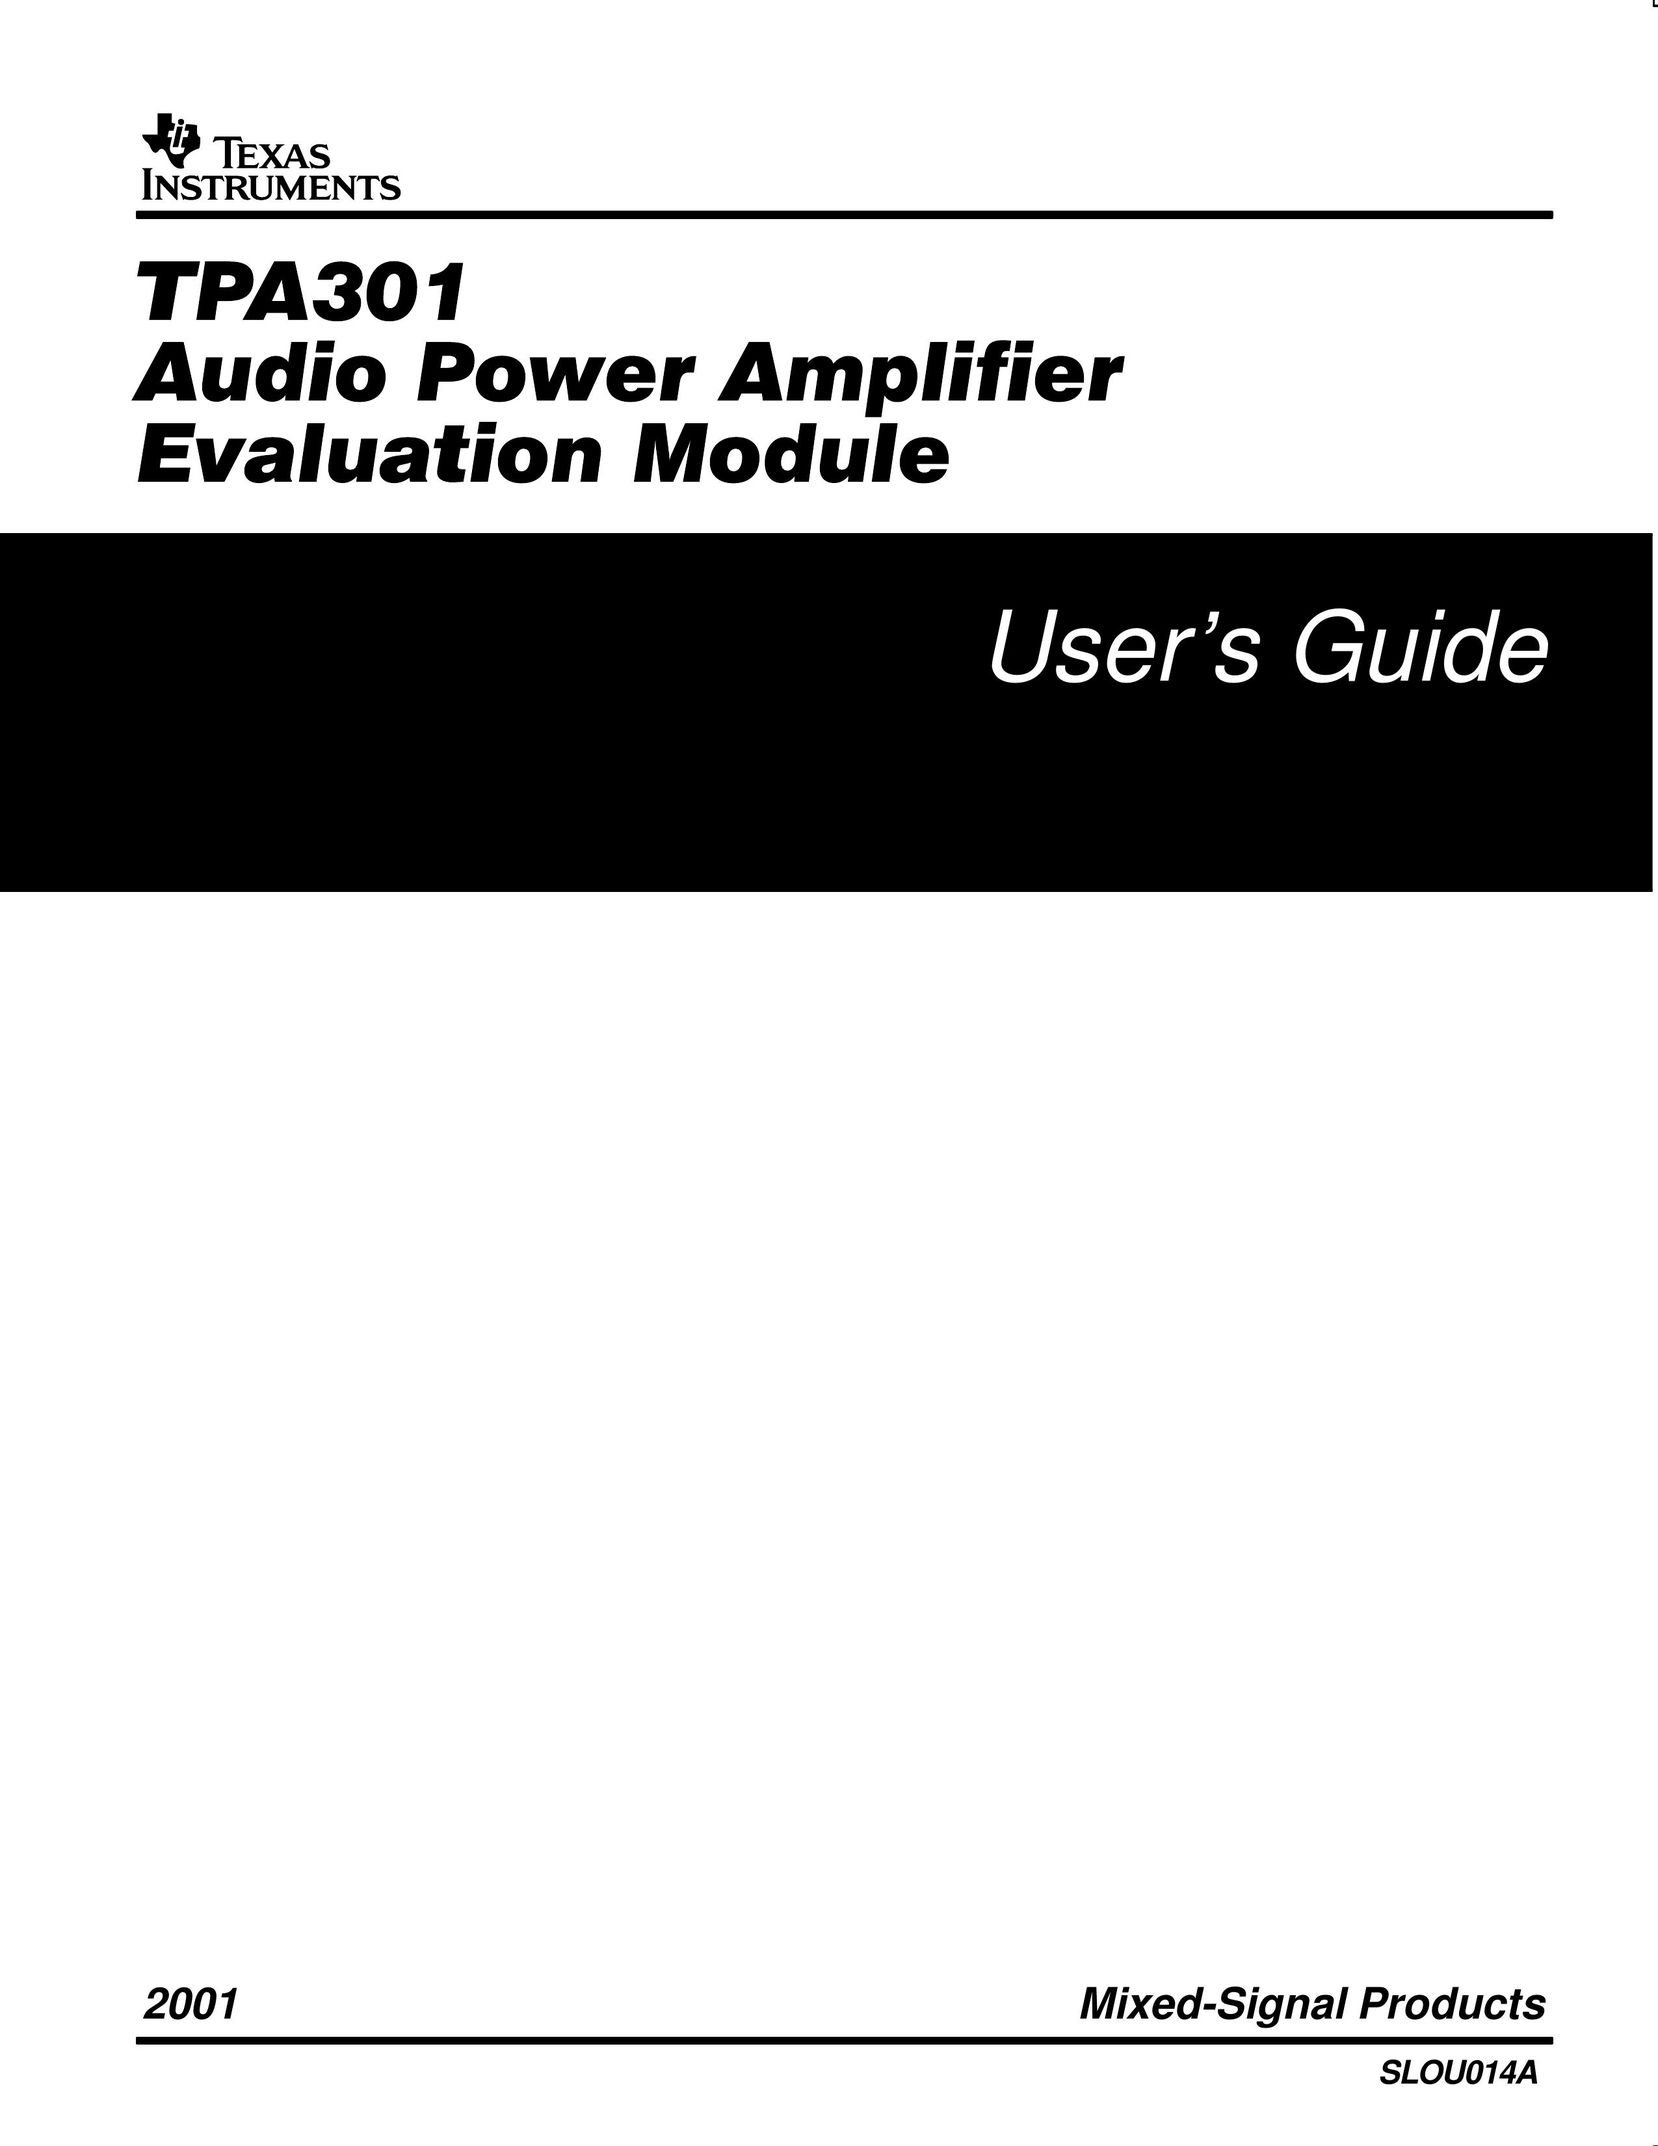 Texas Instruments TPA301 Stereo Amplifier User Manual